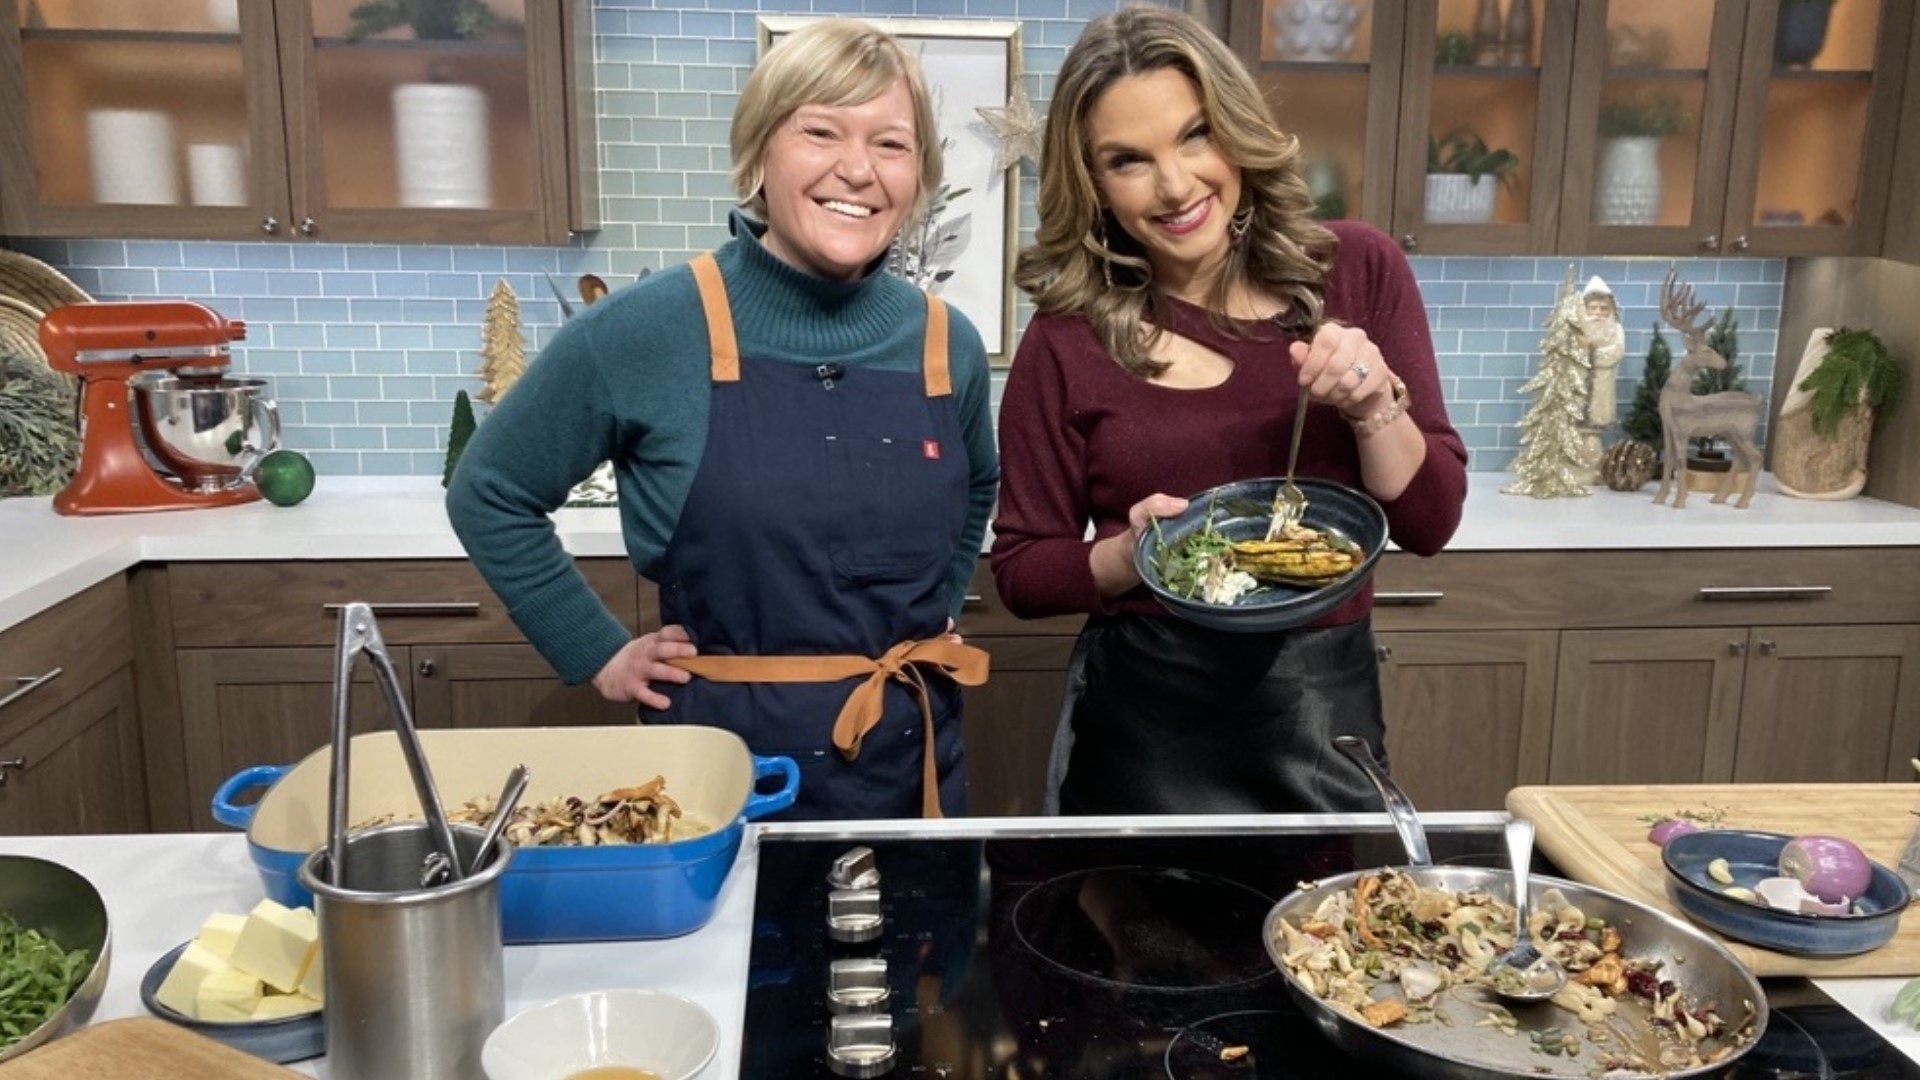 Chef Maggie Trujillo from Aerlume joined the show to share a delicious recipe for delicata squash stuffed with wild mushrooms, dried cranberries, and more! #newdaynw